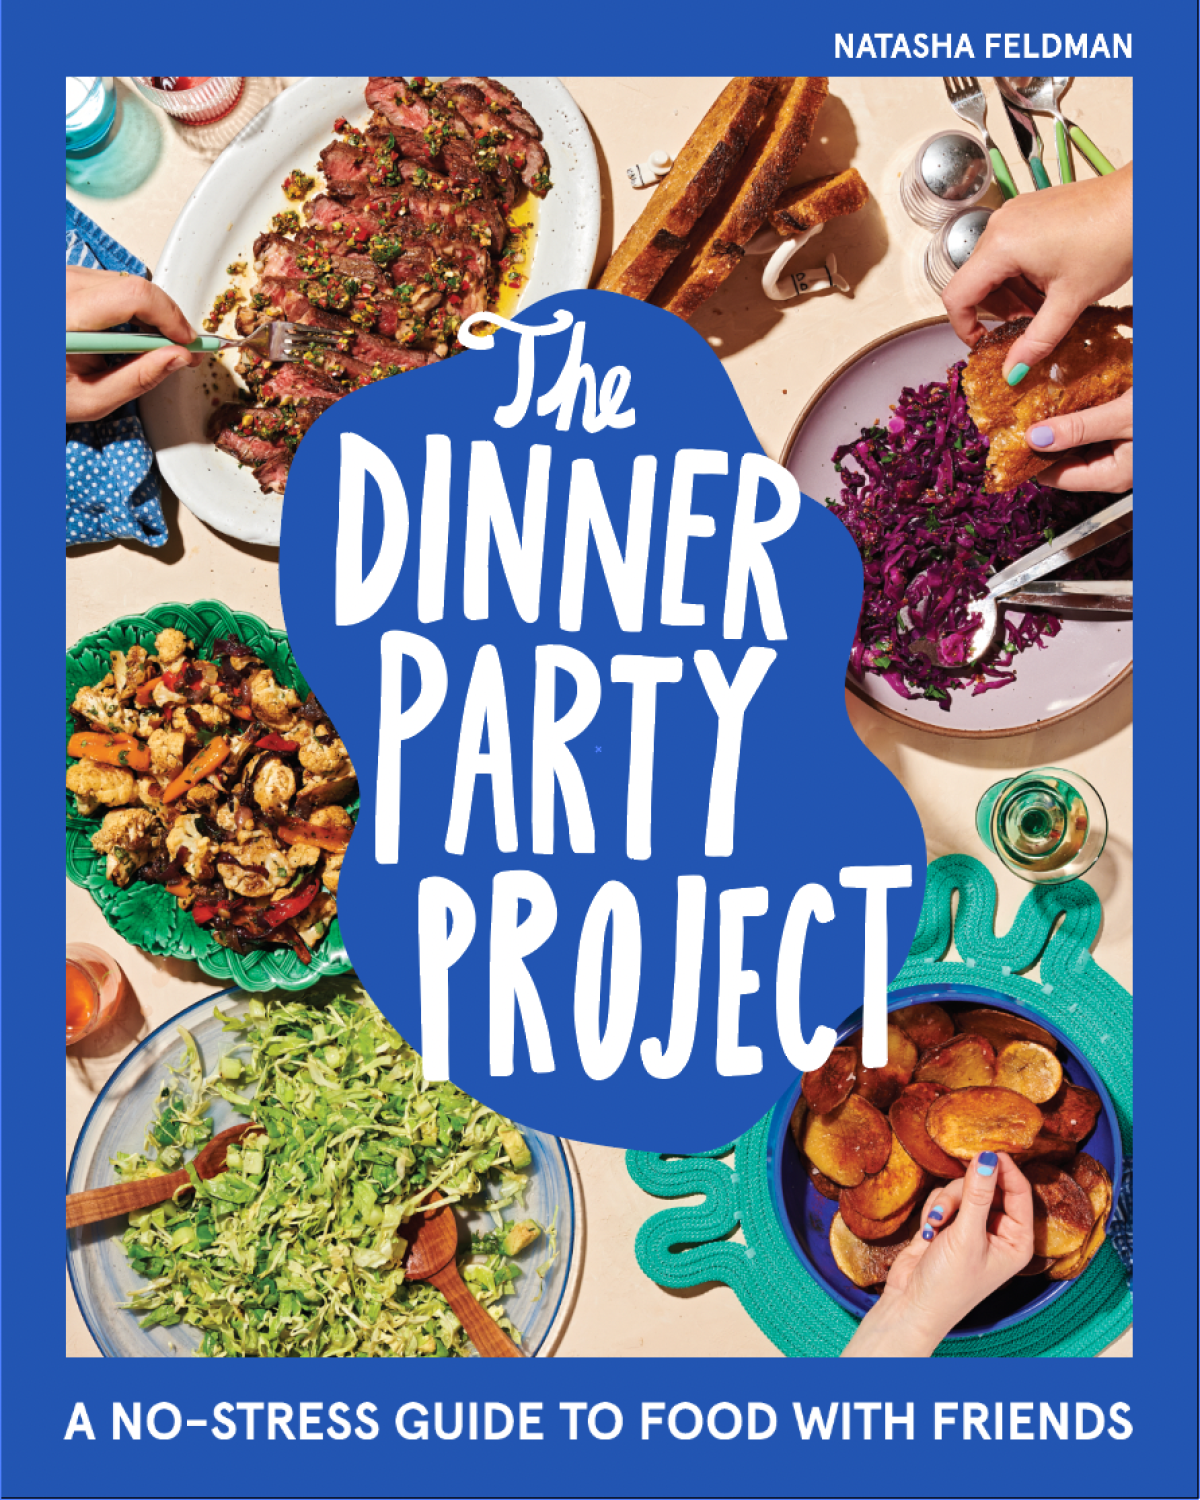 Cover for "The Dinner Party Project" by Natasha Feldman